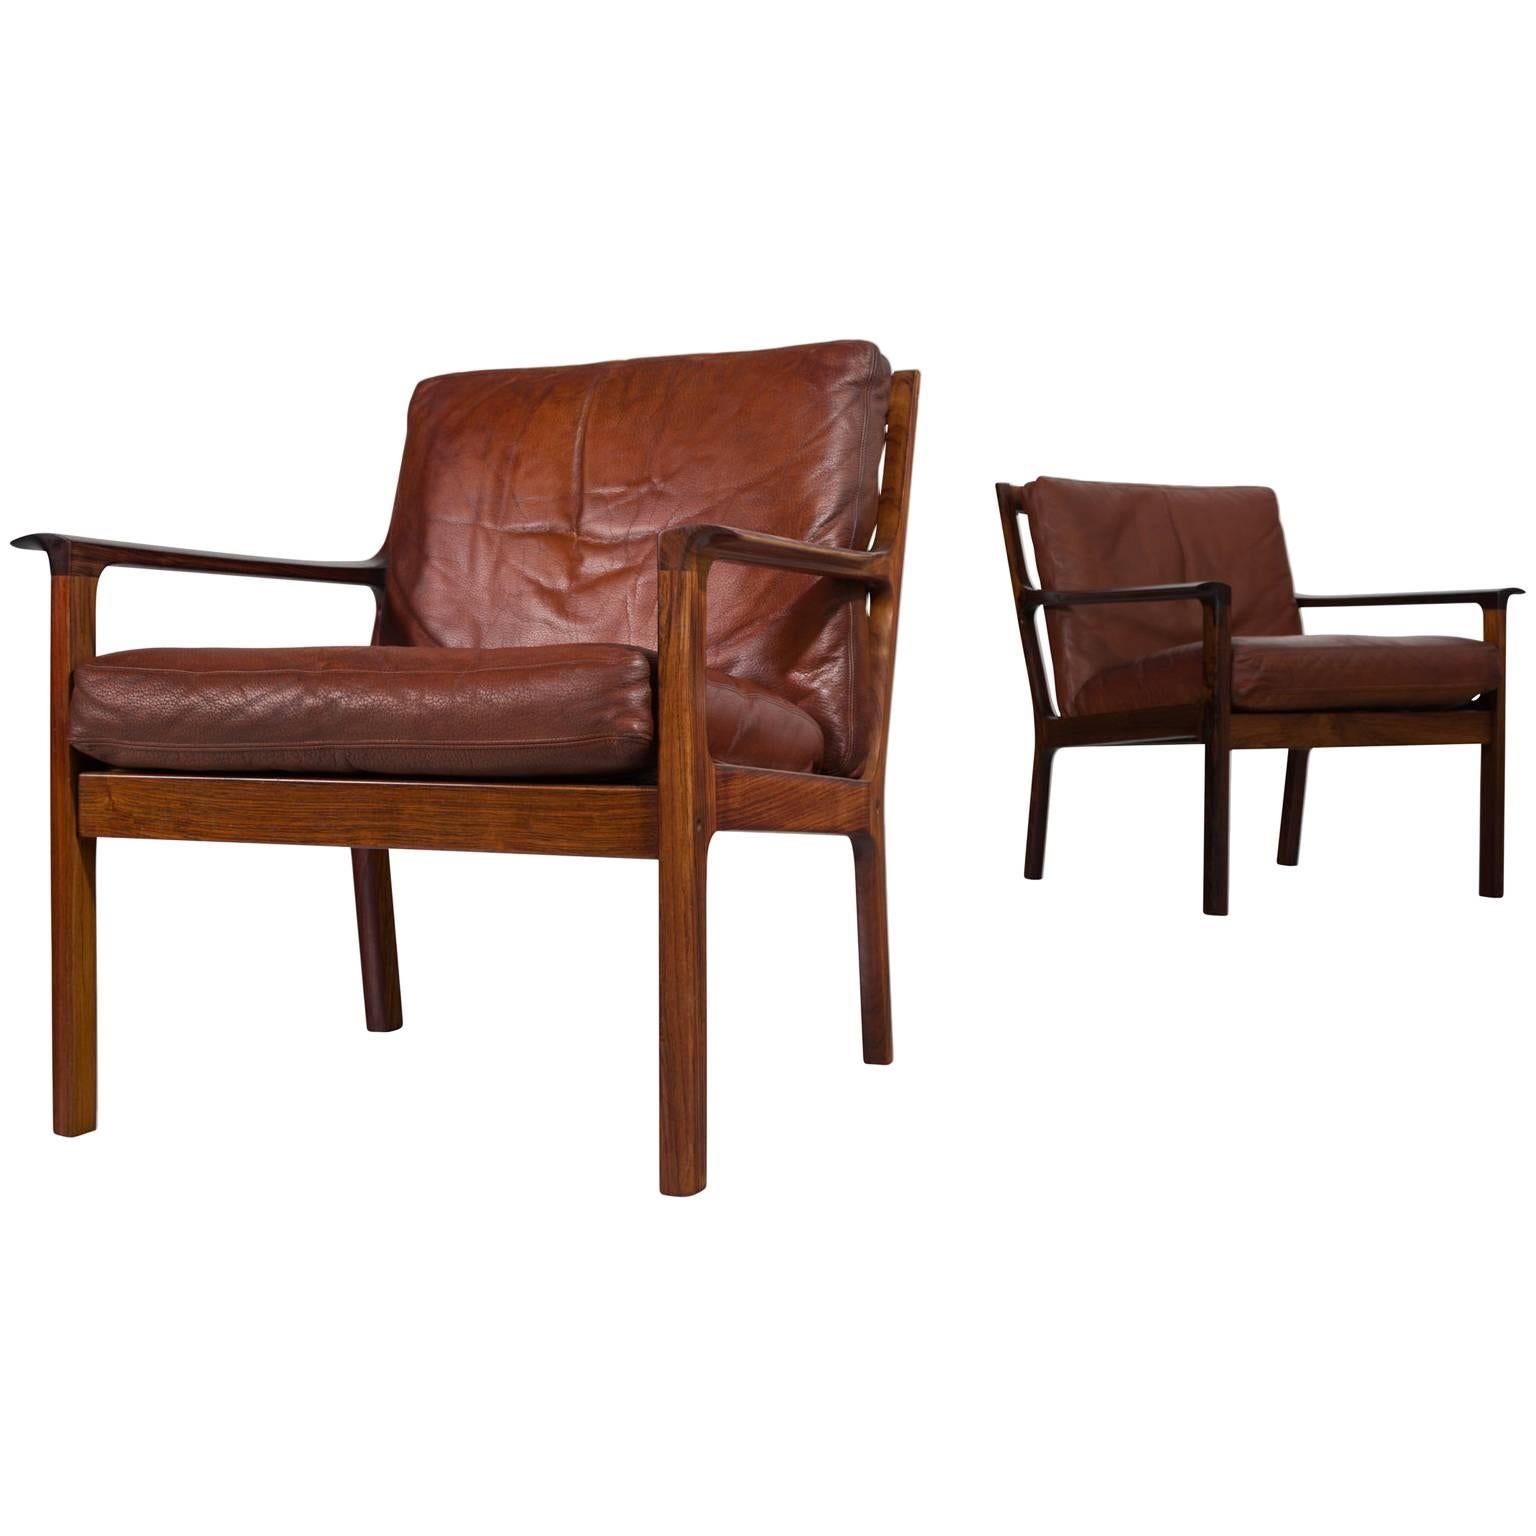 Set of Two Danish Armchairs in Rosewood and Brown Leather Upholstery